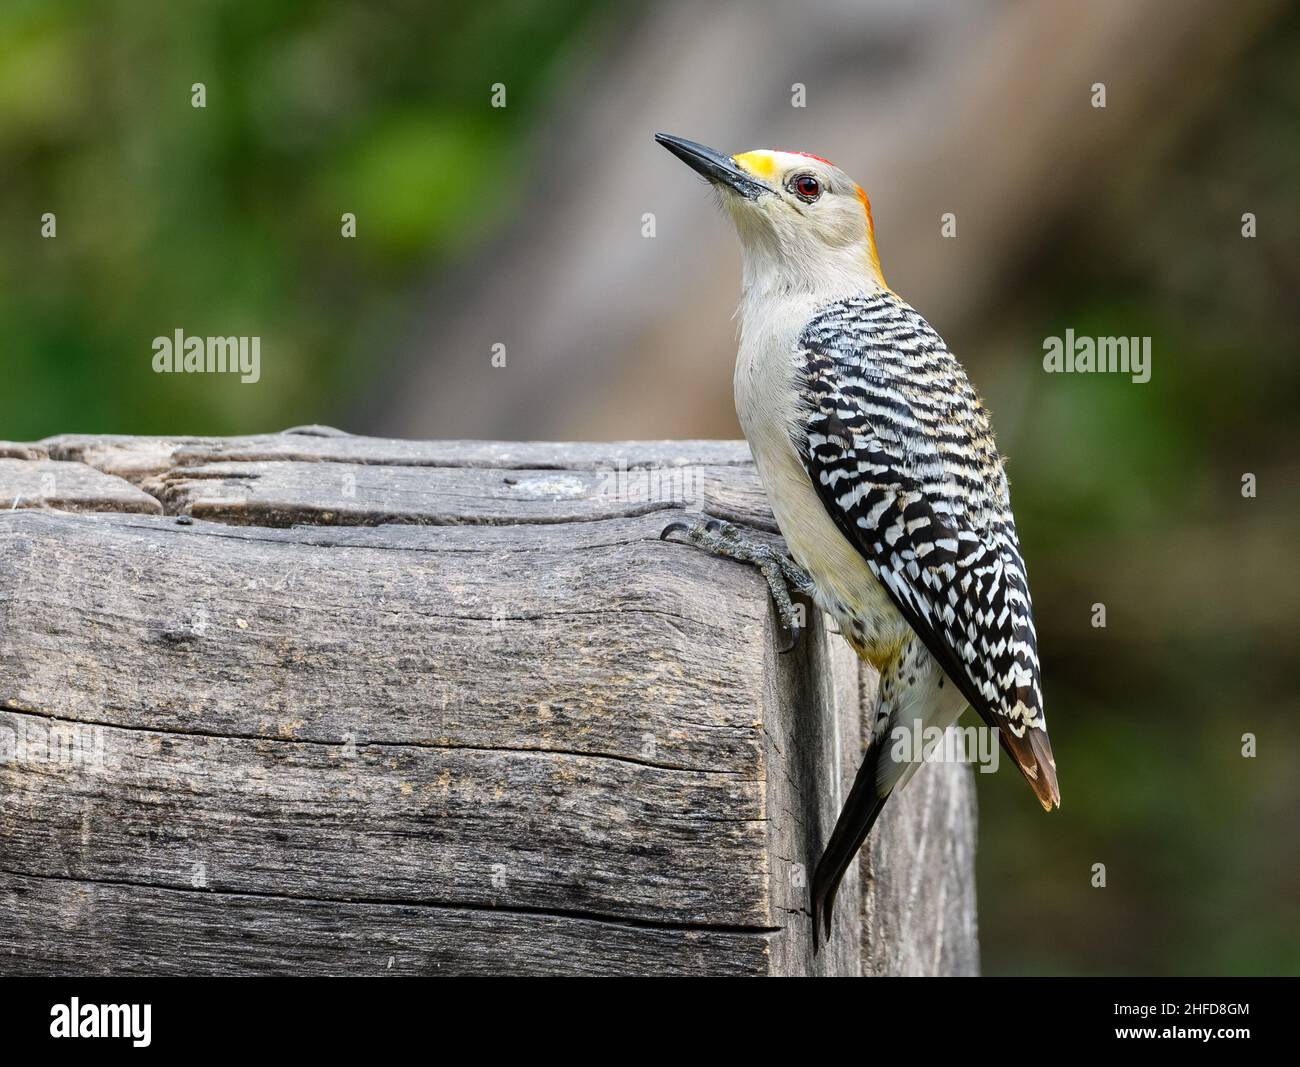 A Golden-fronted Woodpecker (Melanerpes aurifrons) perched on a log. National Butterfly Center. McAllen, Texas, USA. Stock Photo